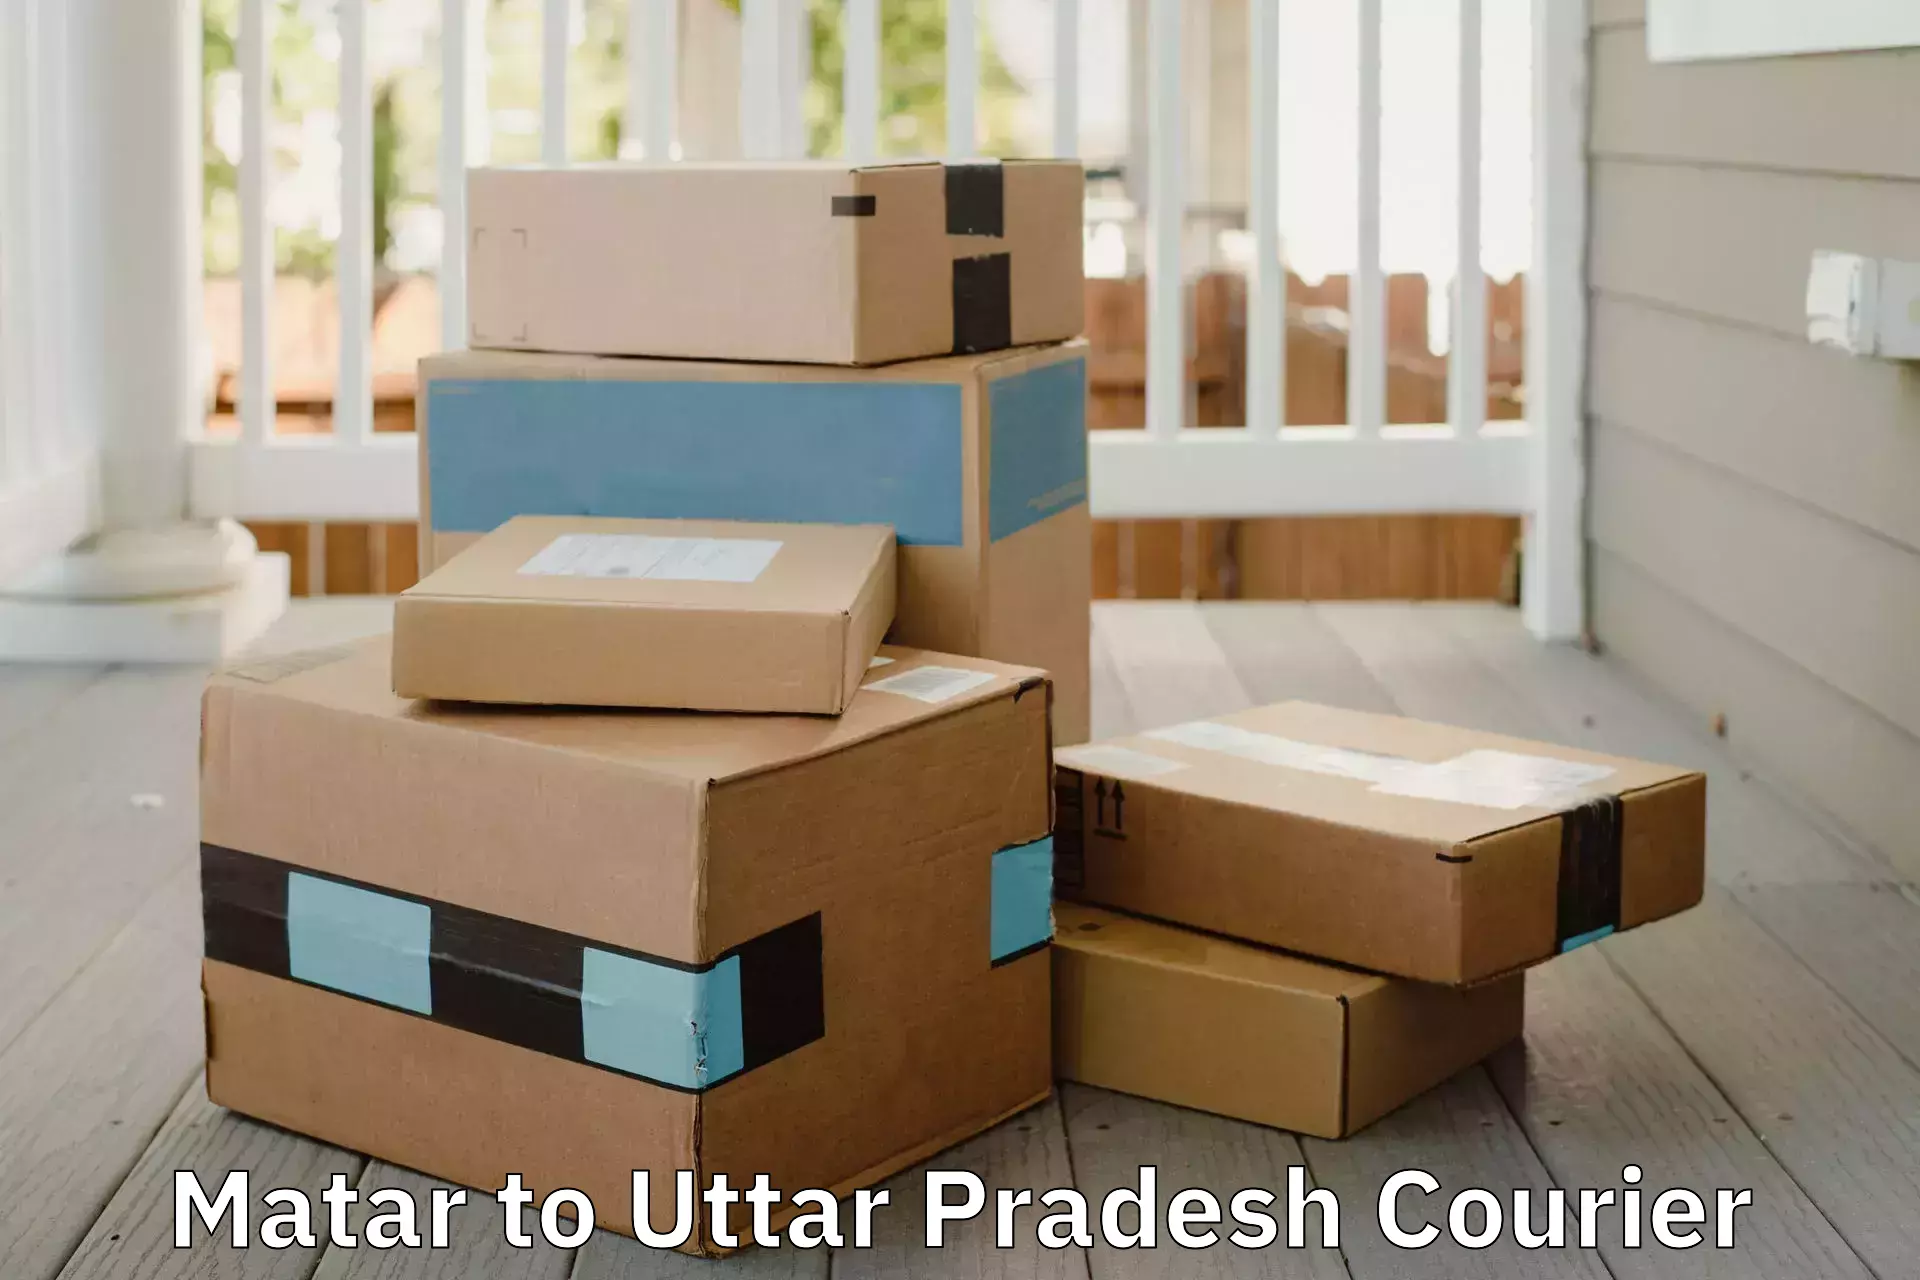 Moving and packing experts Matar to Noida